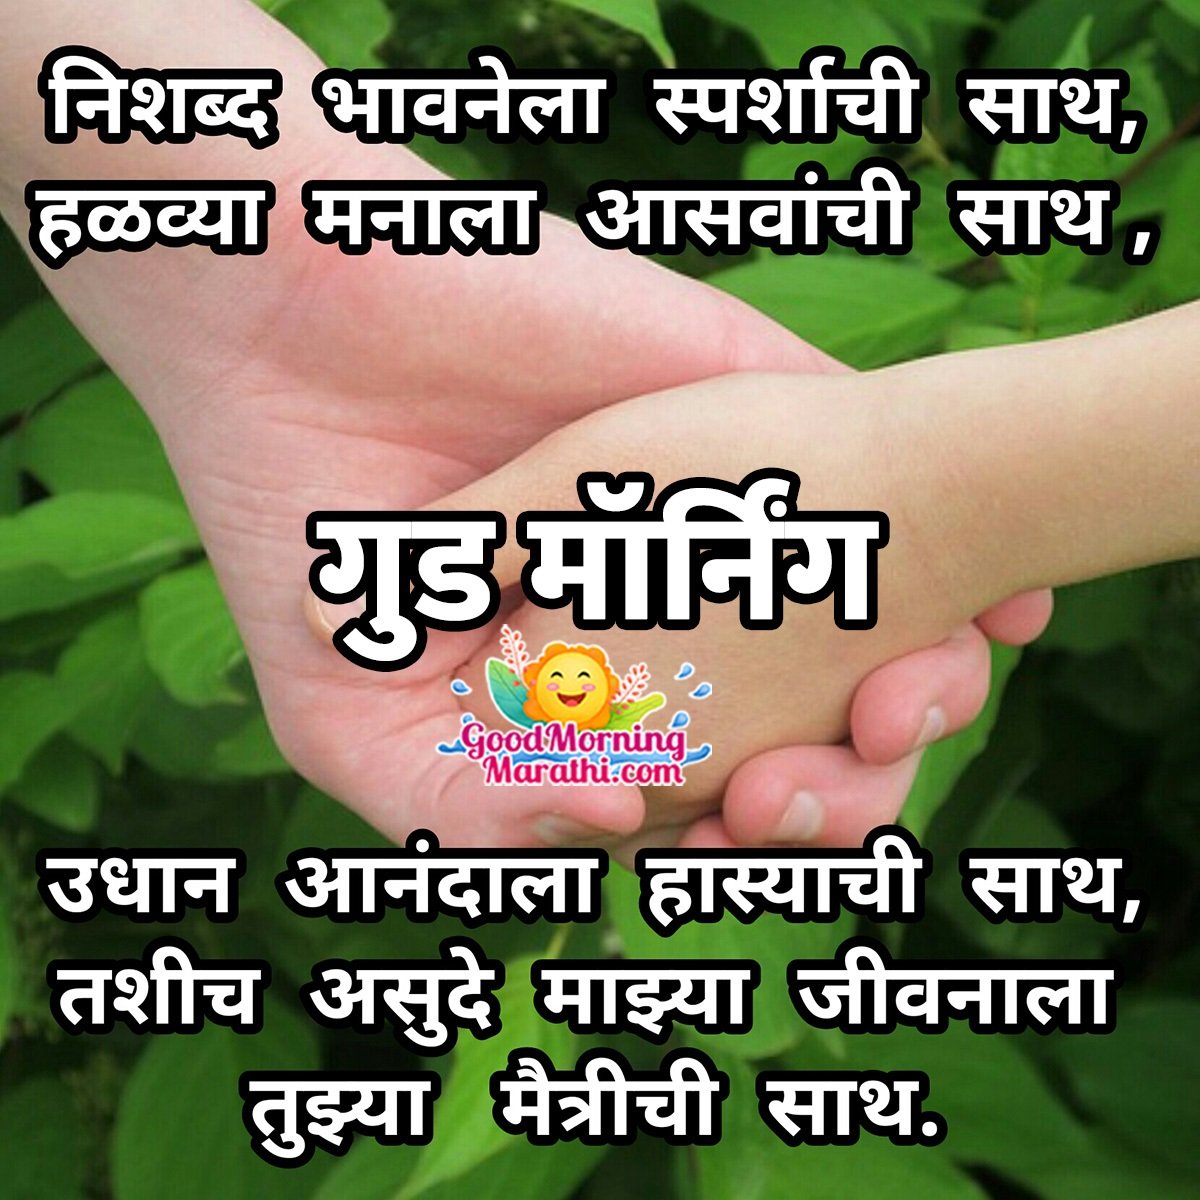 Good Morning Friendship Quotes in Marathi - Good Morning Wishes ...